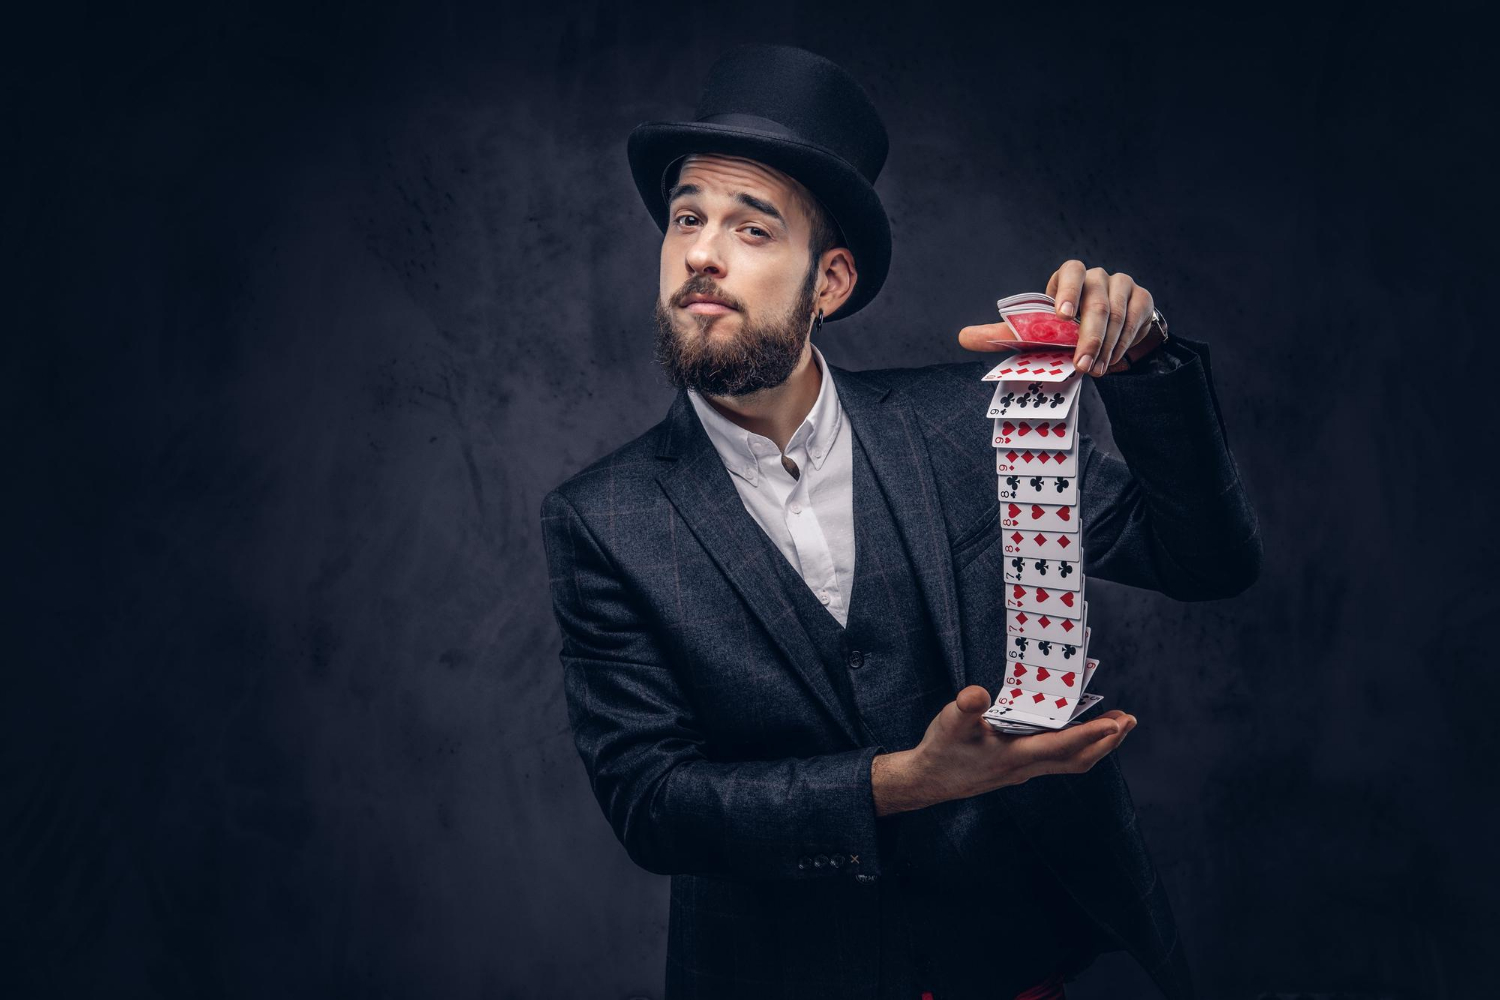 bearded-magician-black-suit-top-hat-showing-trick-with-playing-cards-dark-background_fxquadro_freepik.jpg